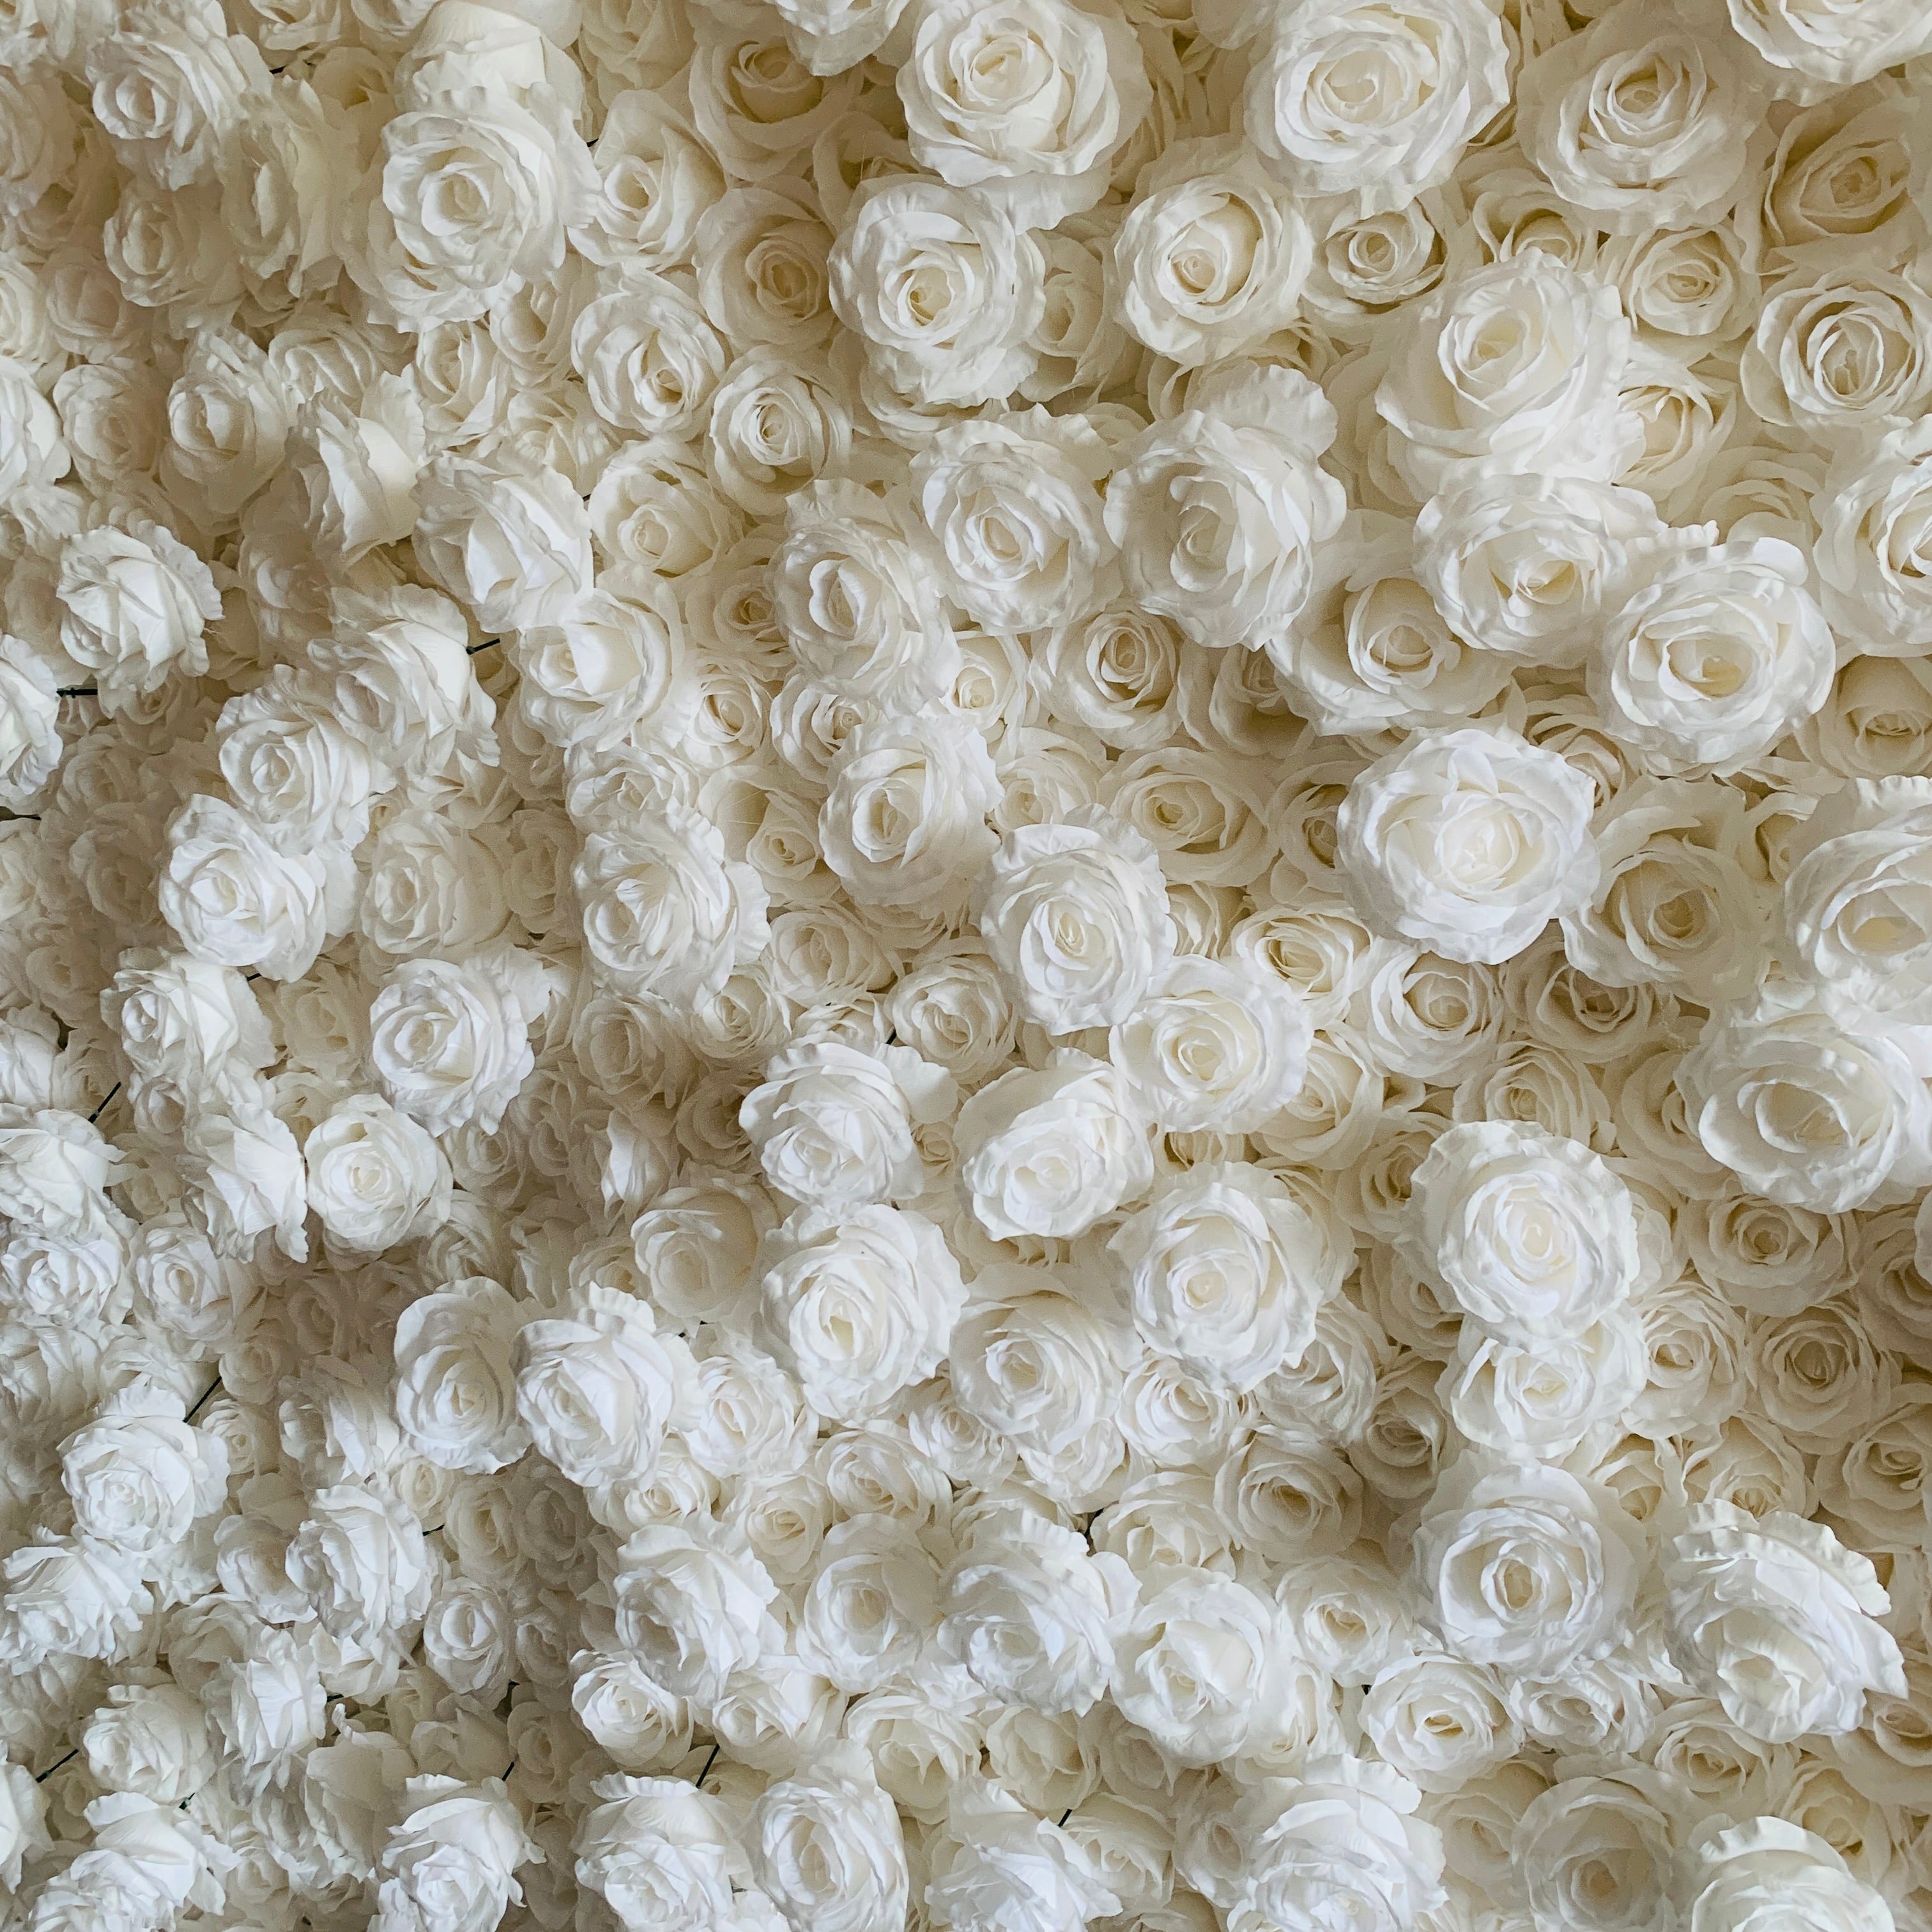 Flower Wall Pure White Rose Fabric Rolling Up Curtain Floral Backdrop Wedding Party Proposal Decor-10